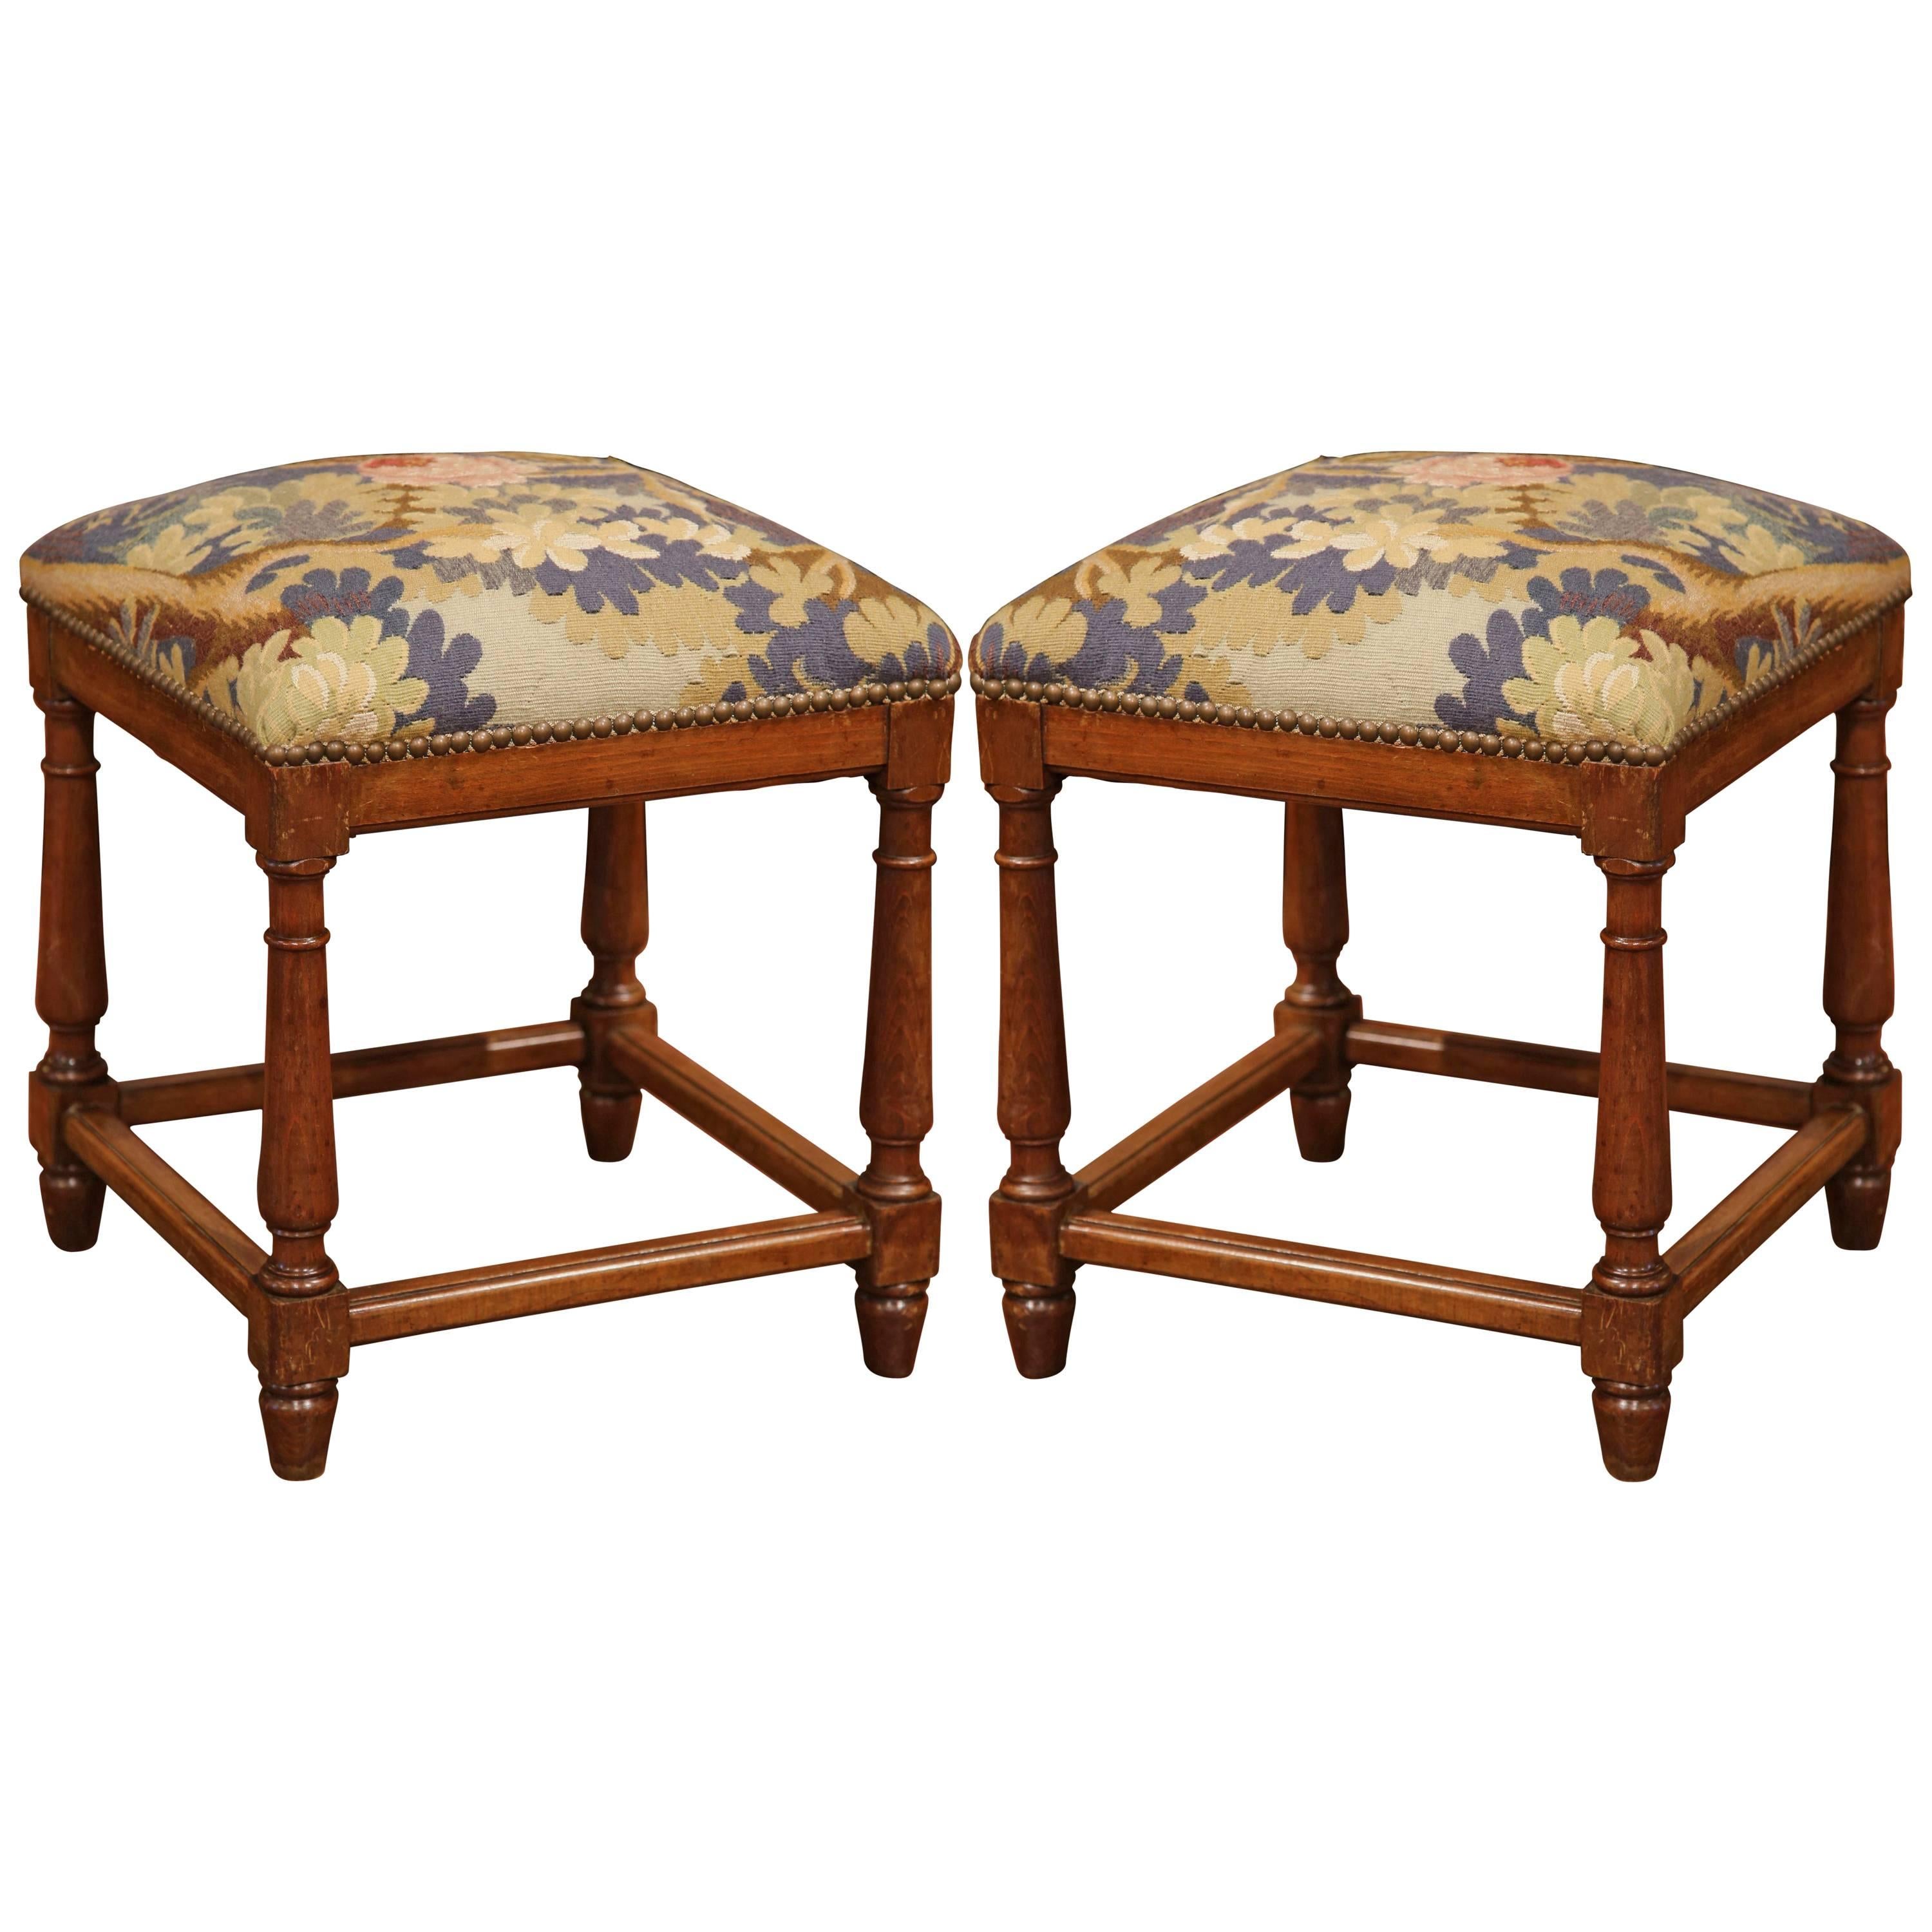 Pair of Mid-19th Century, French Square Walnut Stools with Aubusson Tapestry